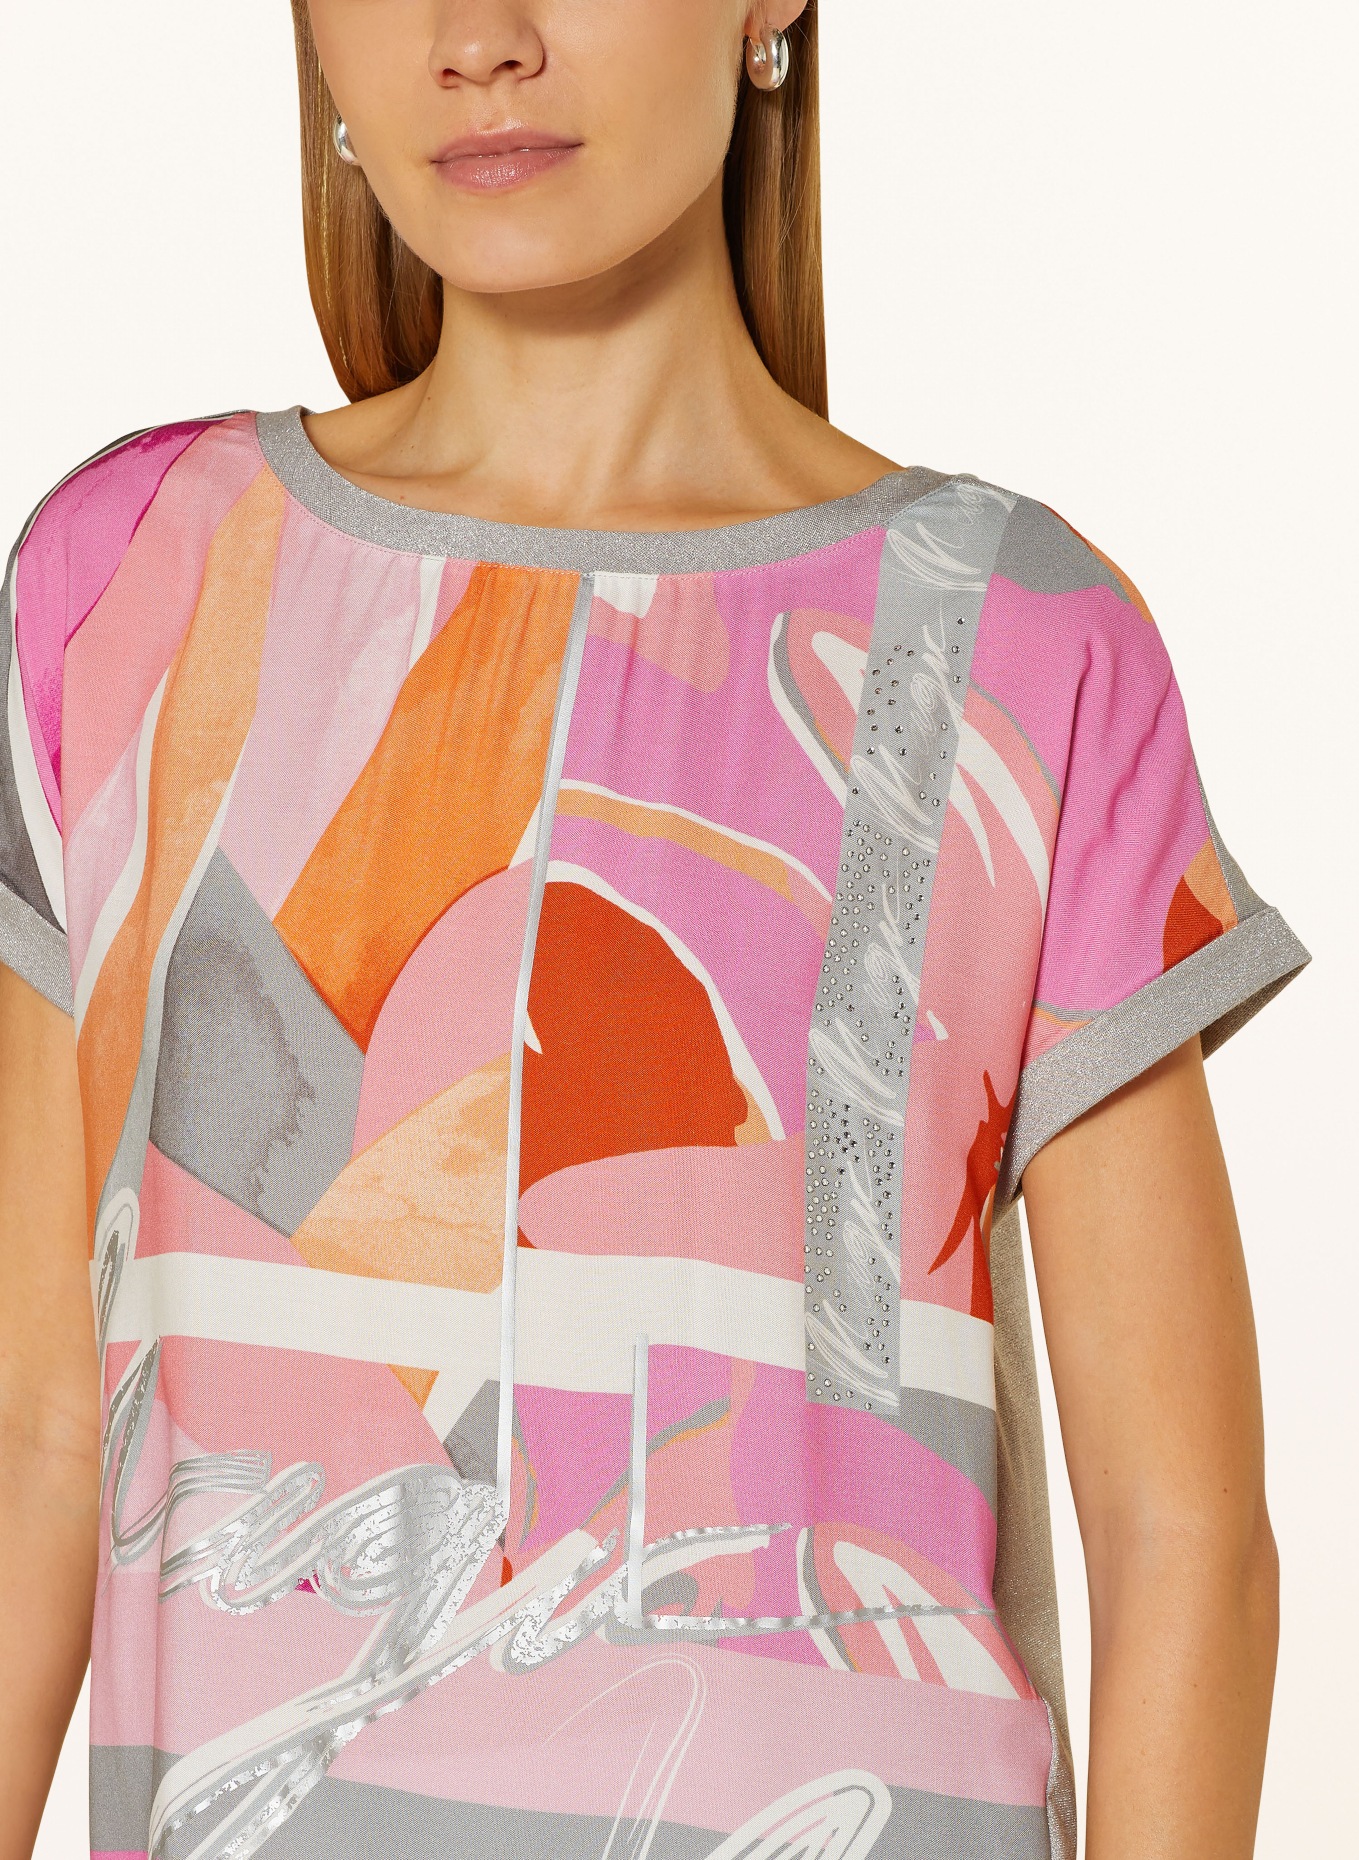 Betty Barclay T-shirt in mixed materials, Color: GRAY/ PINK/ ORANGE (Image 4)